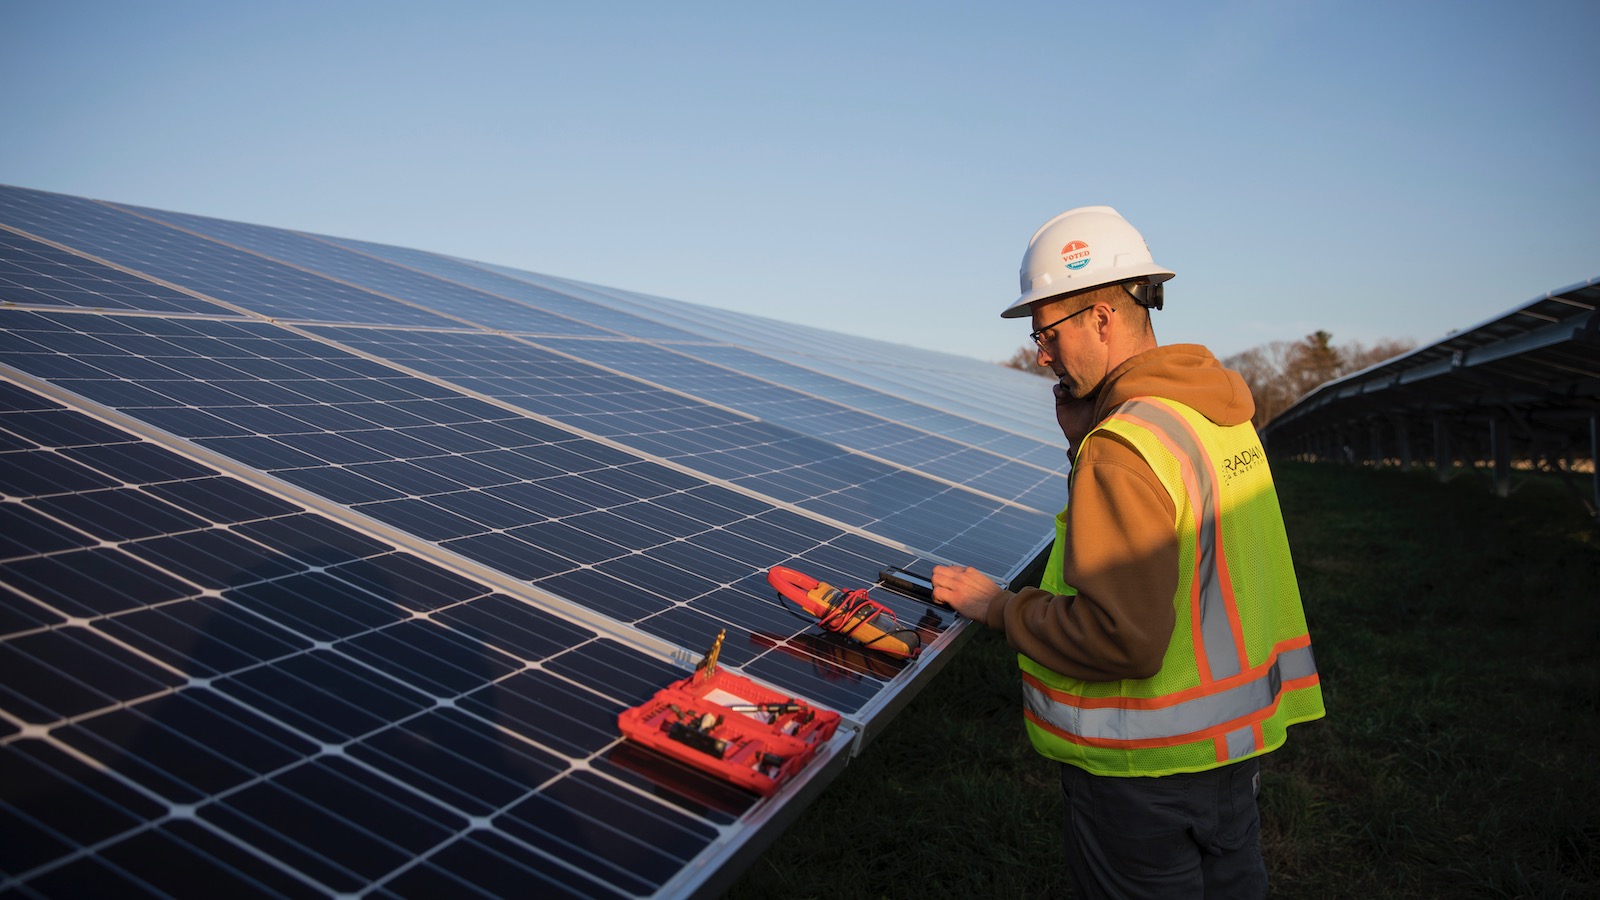 An electrician in a yellow vest and whote hard hat works on a photovoltaic panel in a solar array on a farm in Massachusetts.